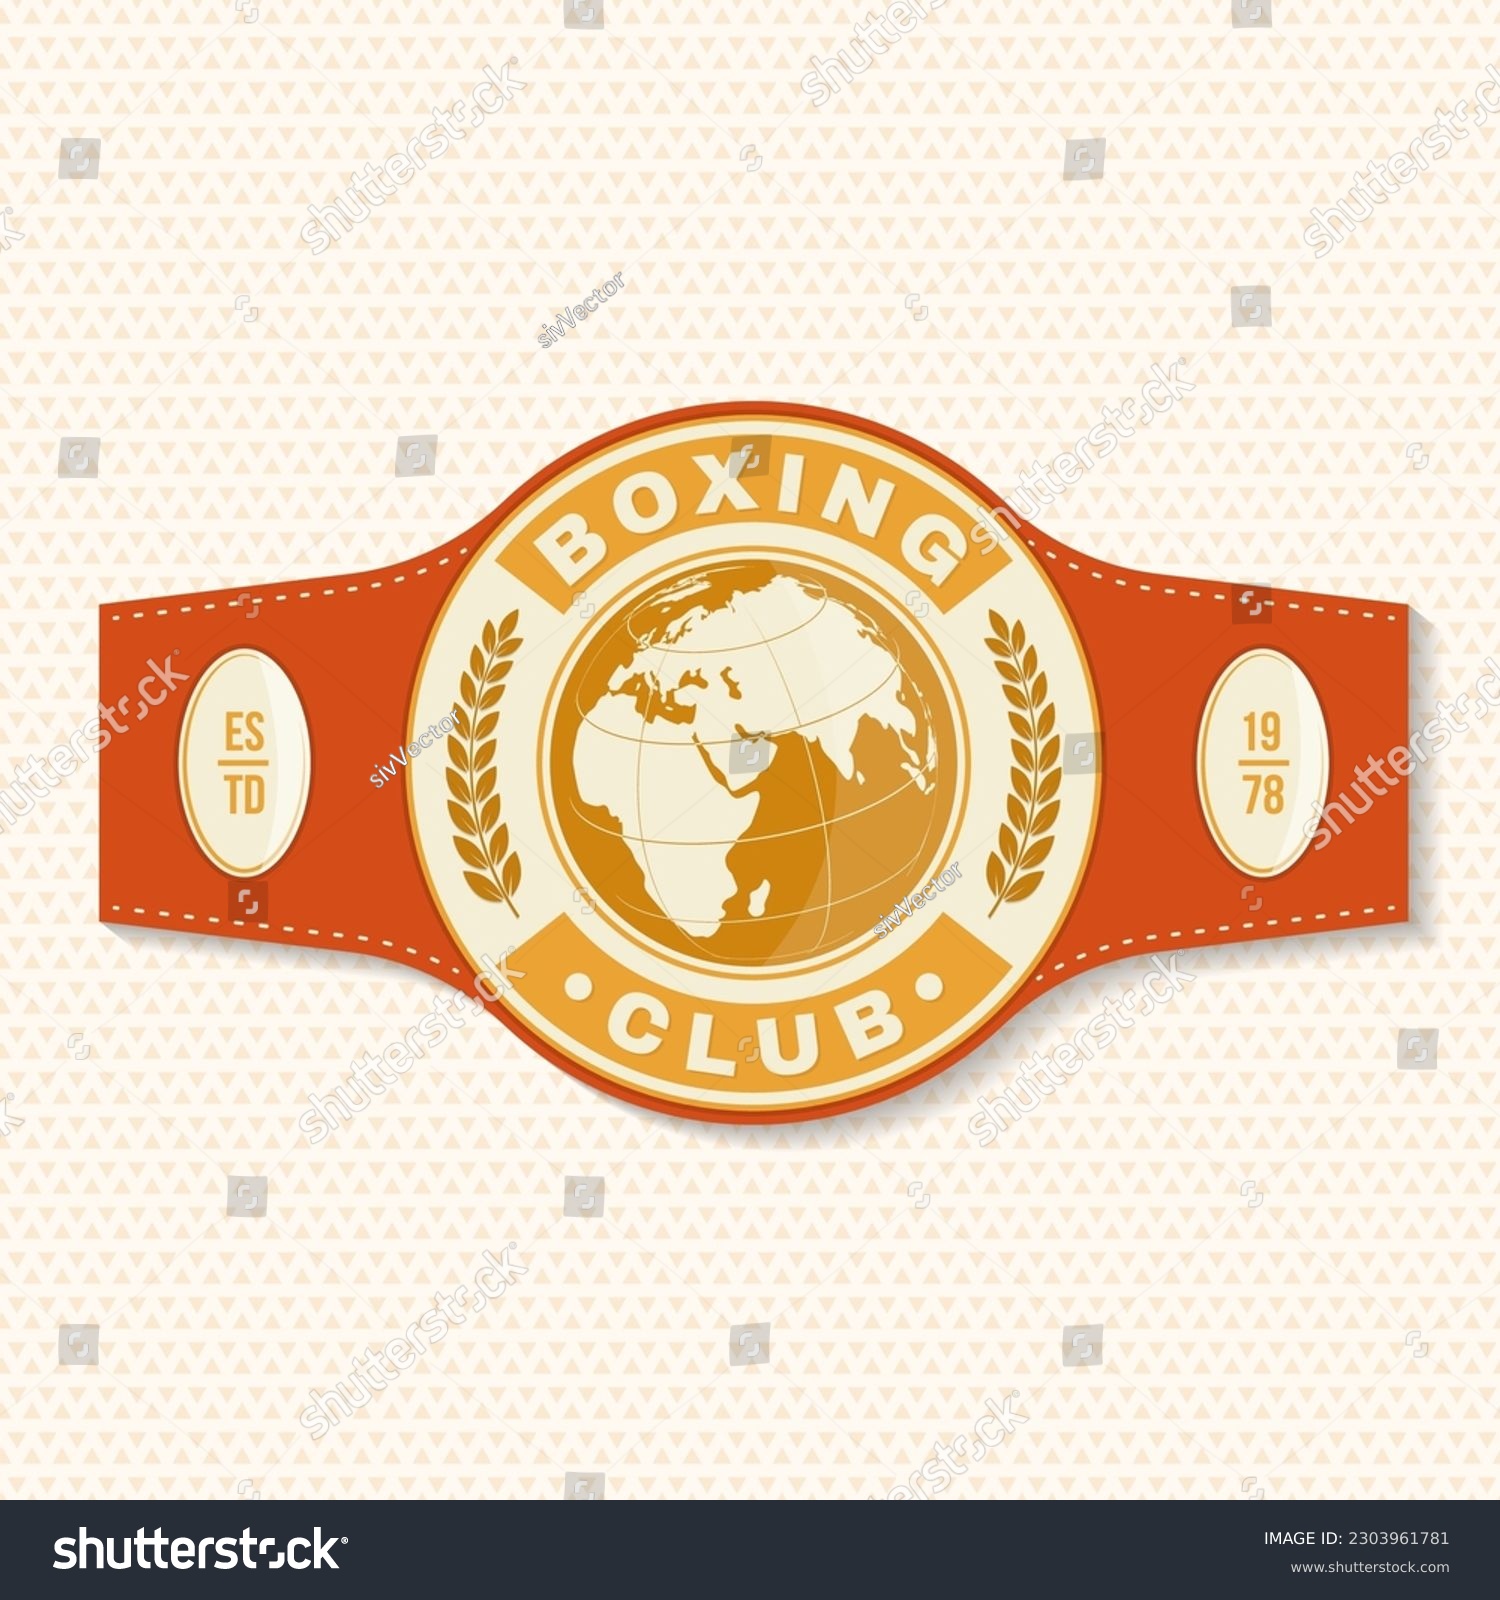 SVG of Boxing club badge, logo, patch design. Vector illustration. For Boxing sport club emblem, sign, patch, shirt, template. Vintage retro label, sticker with champion belt Silhouette. svg